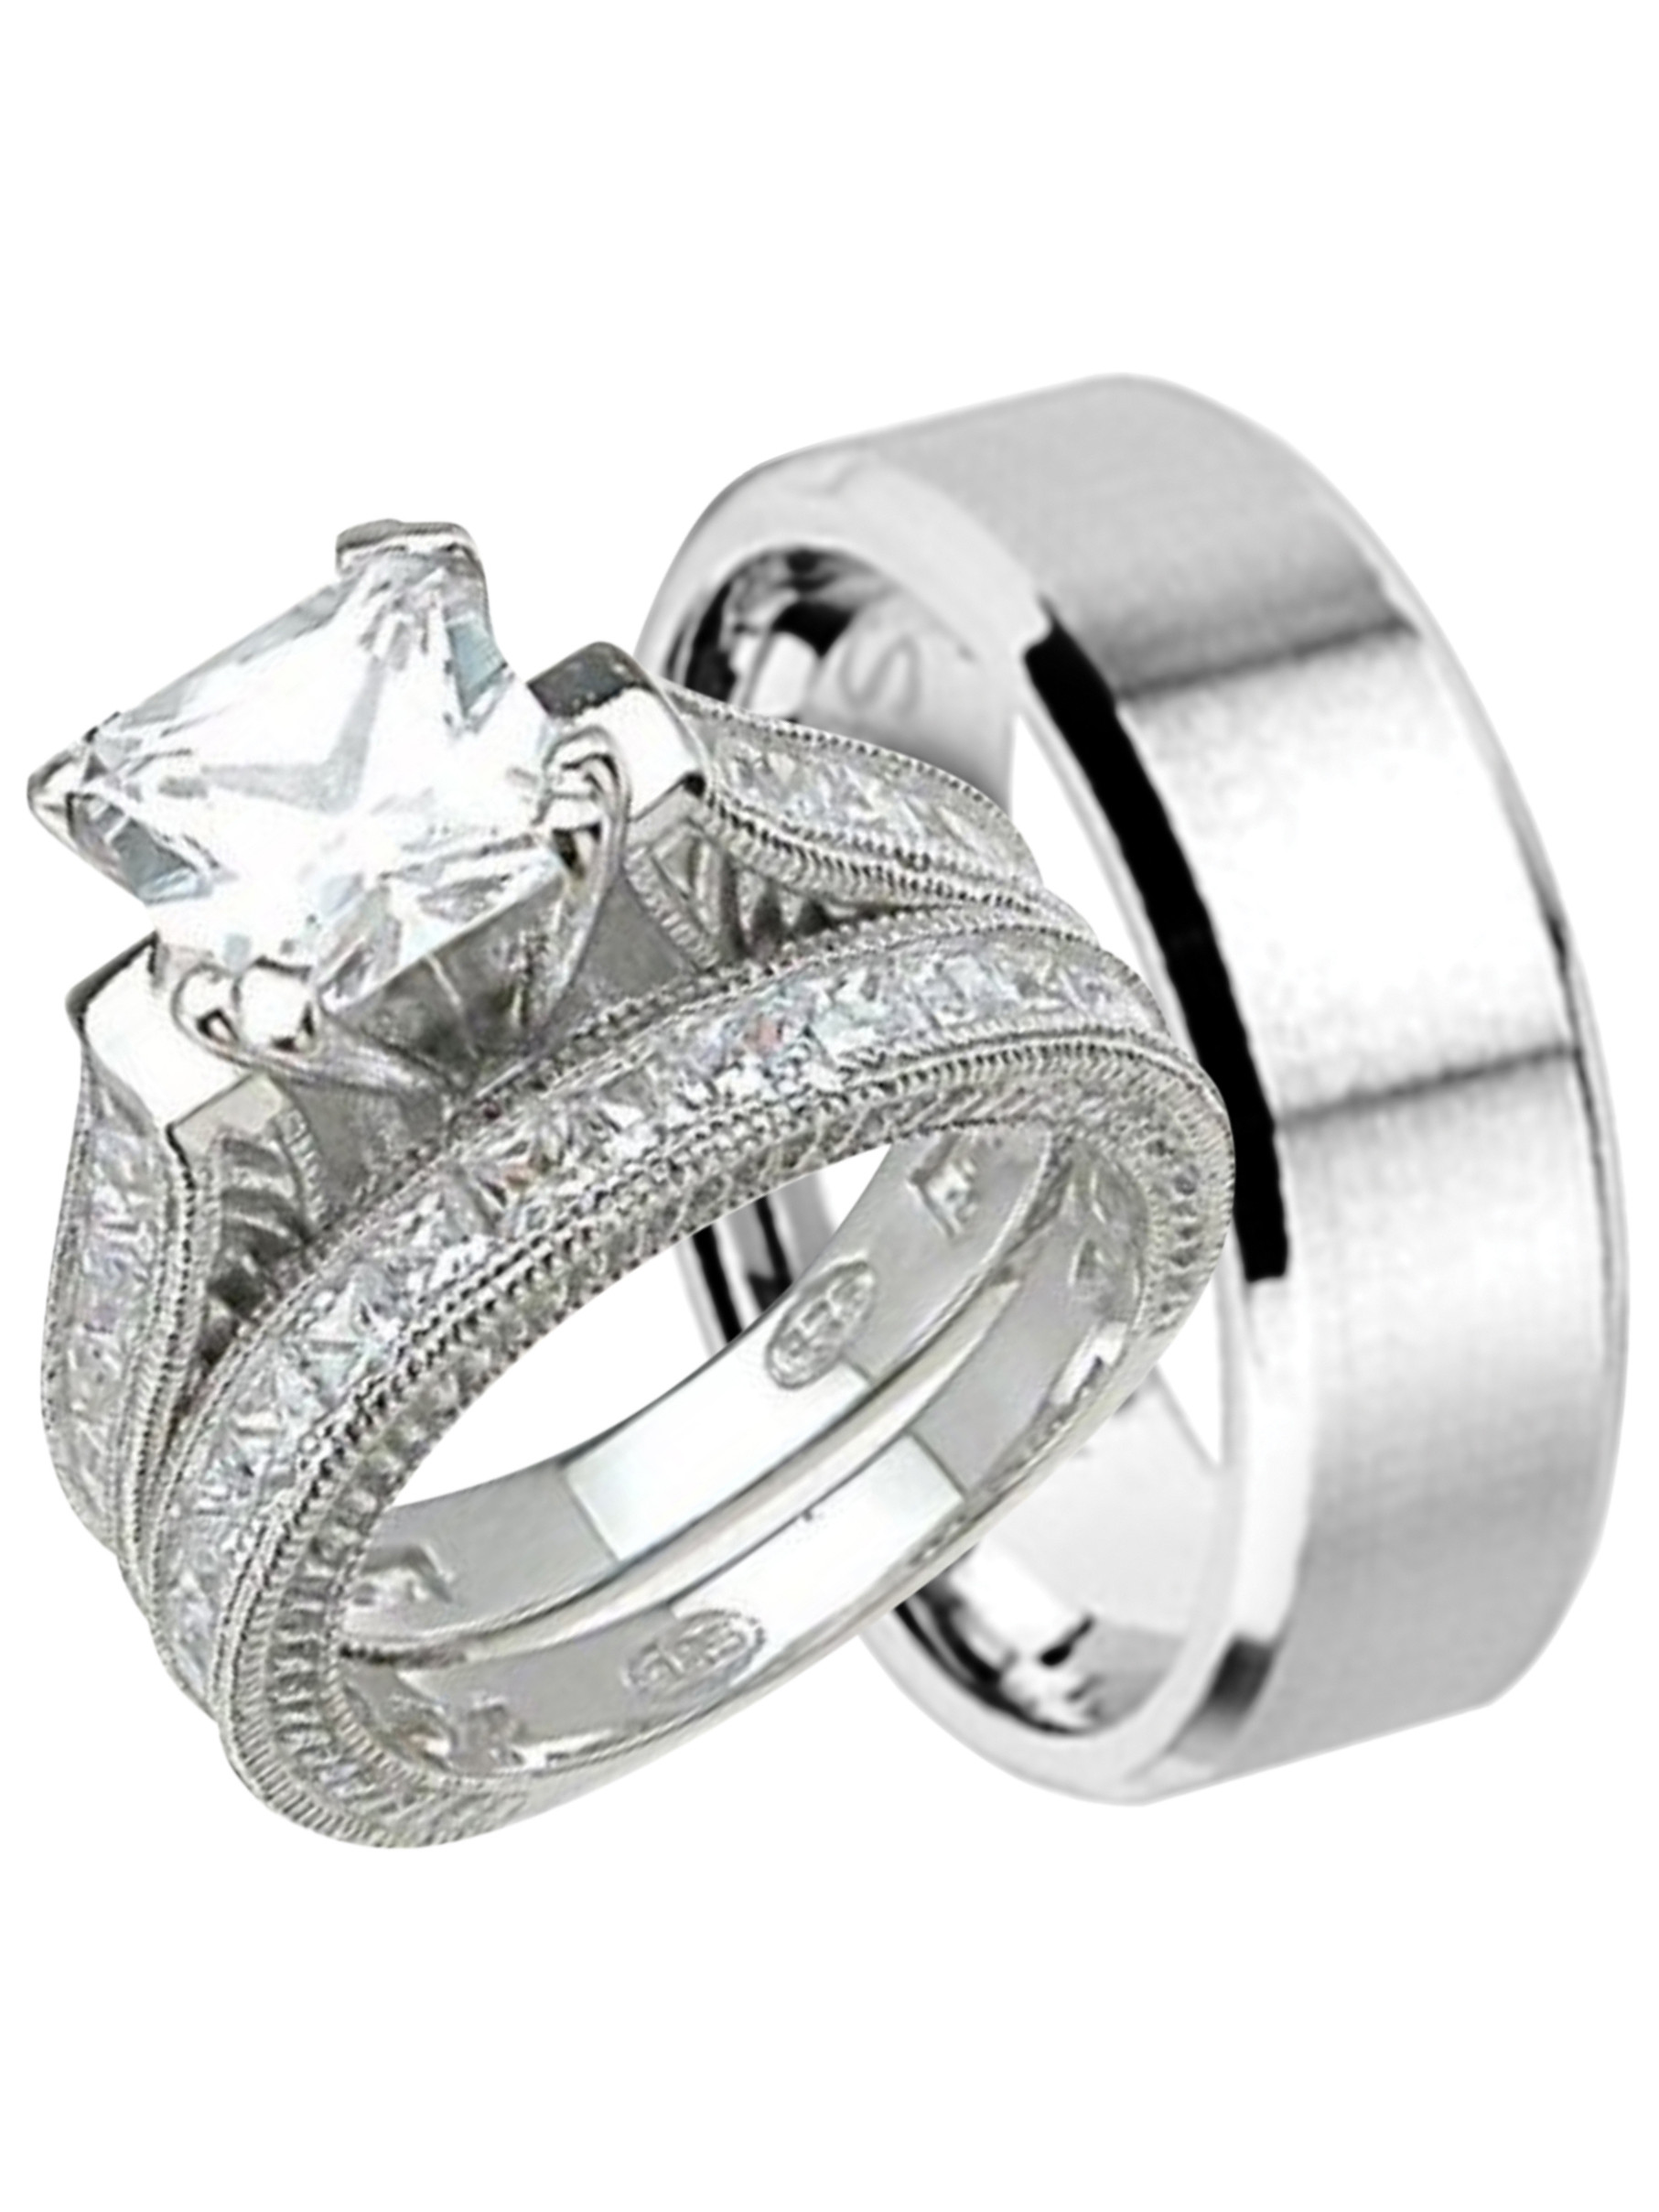 Wedding Rings Sets For Him And Her Cheap
 LaRaso & Co His and Hers Wedding Ring Set Cheap Wedding